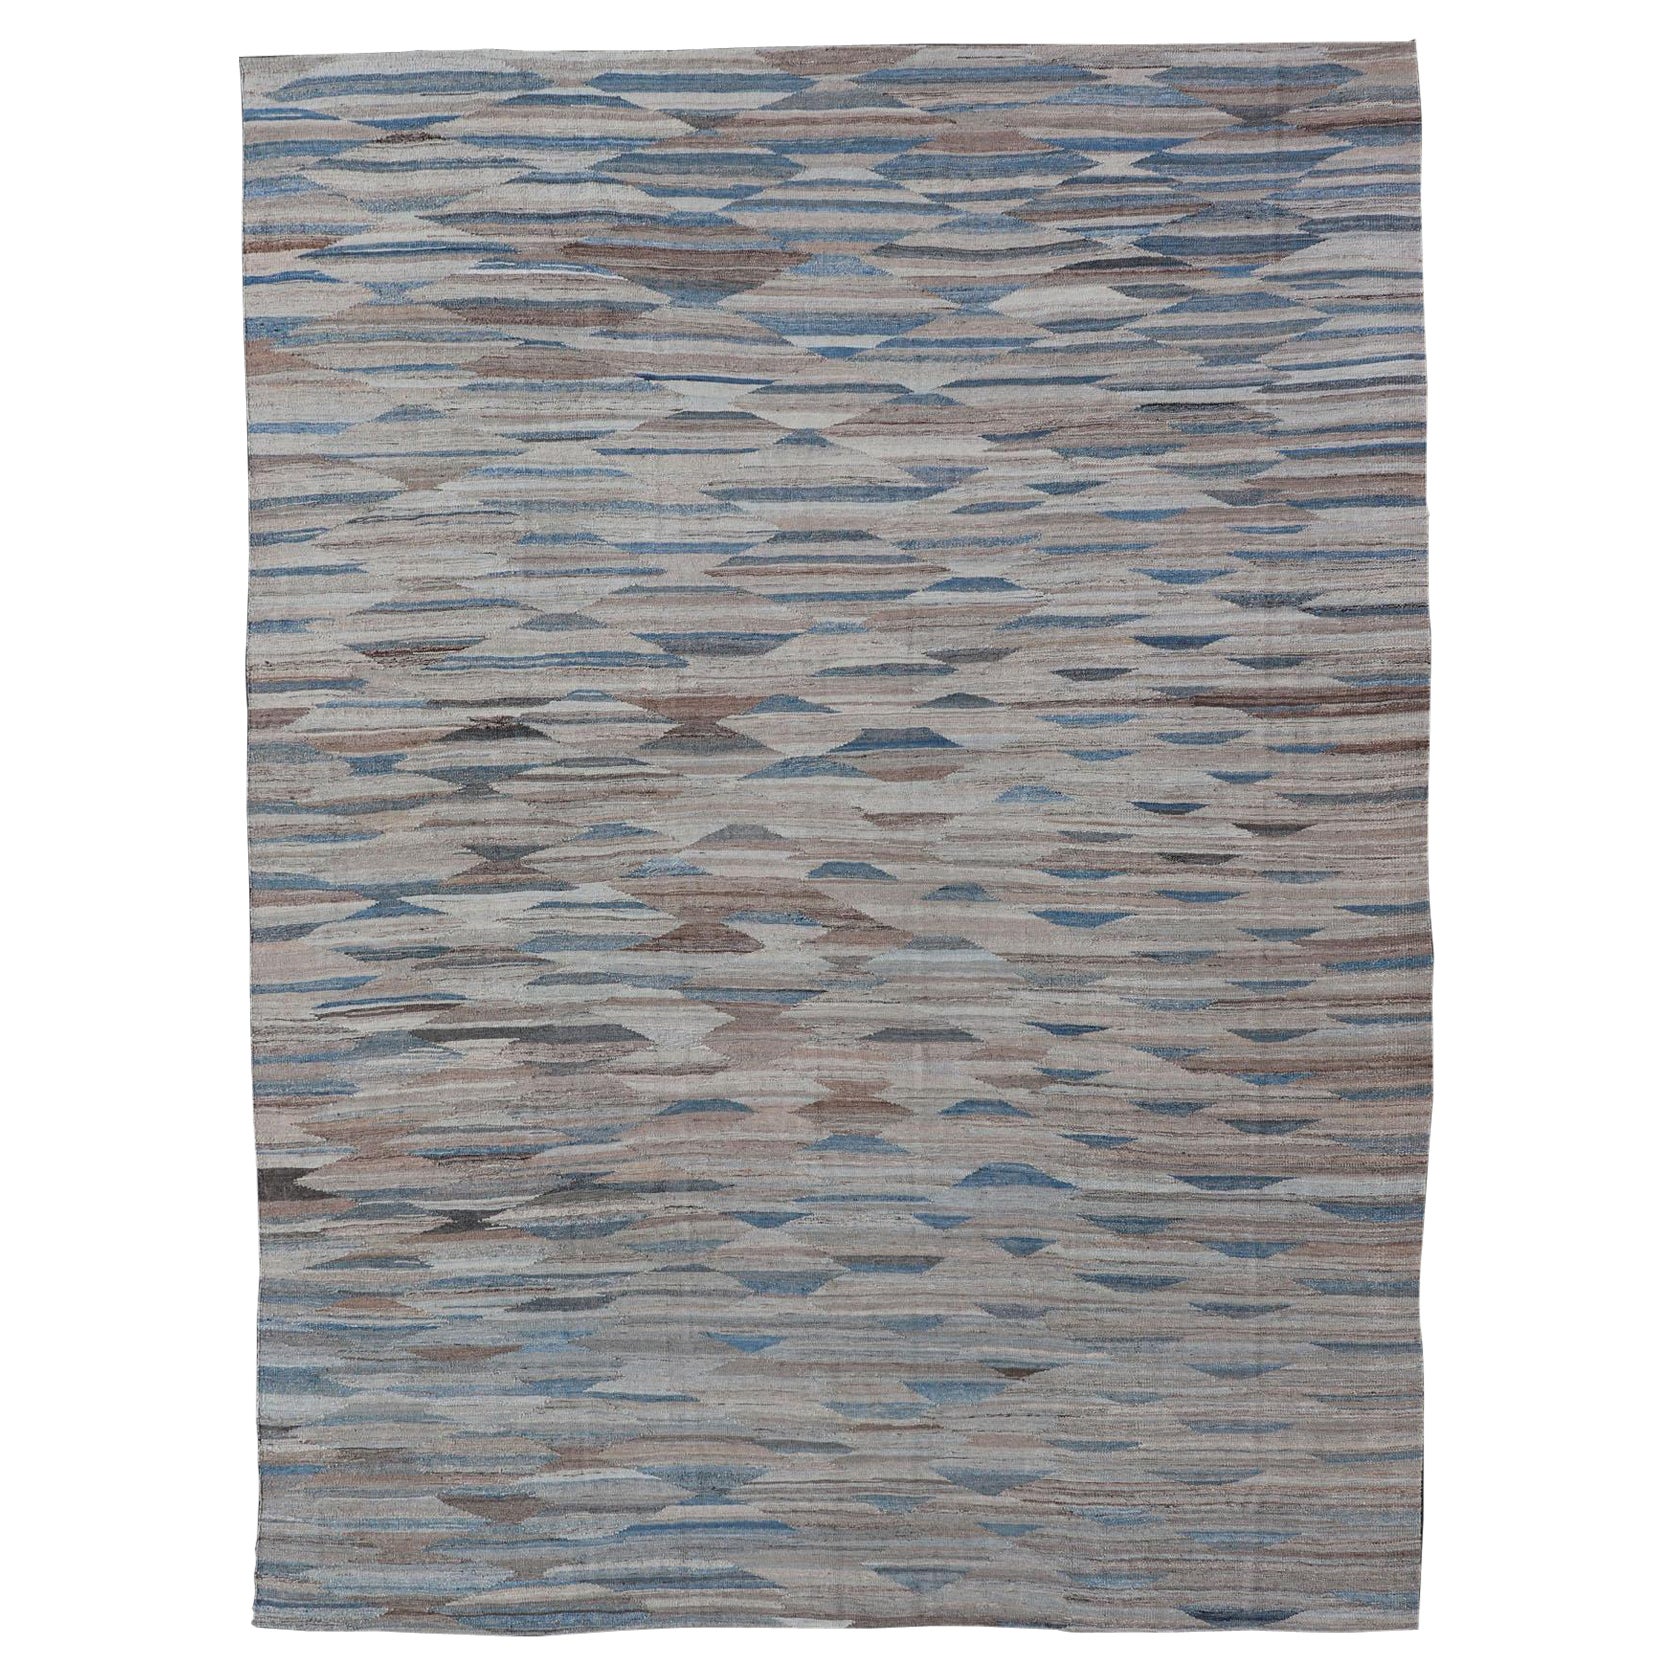  Modern Kilim with Geometrics in  variation of Blue , Brown, Tan & Neutral Tones For Sale